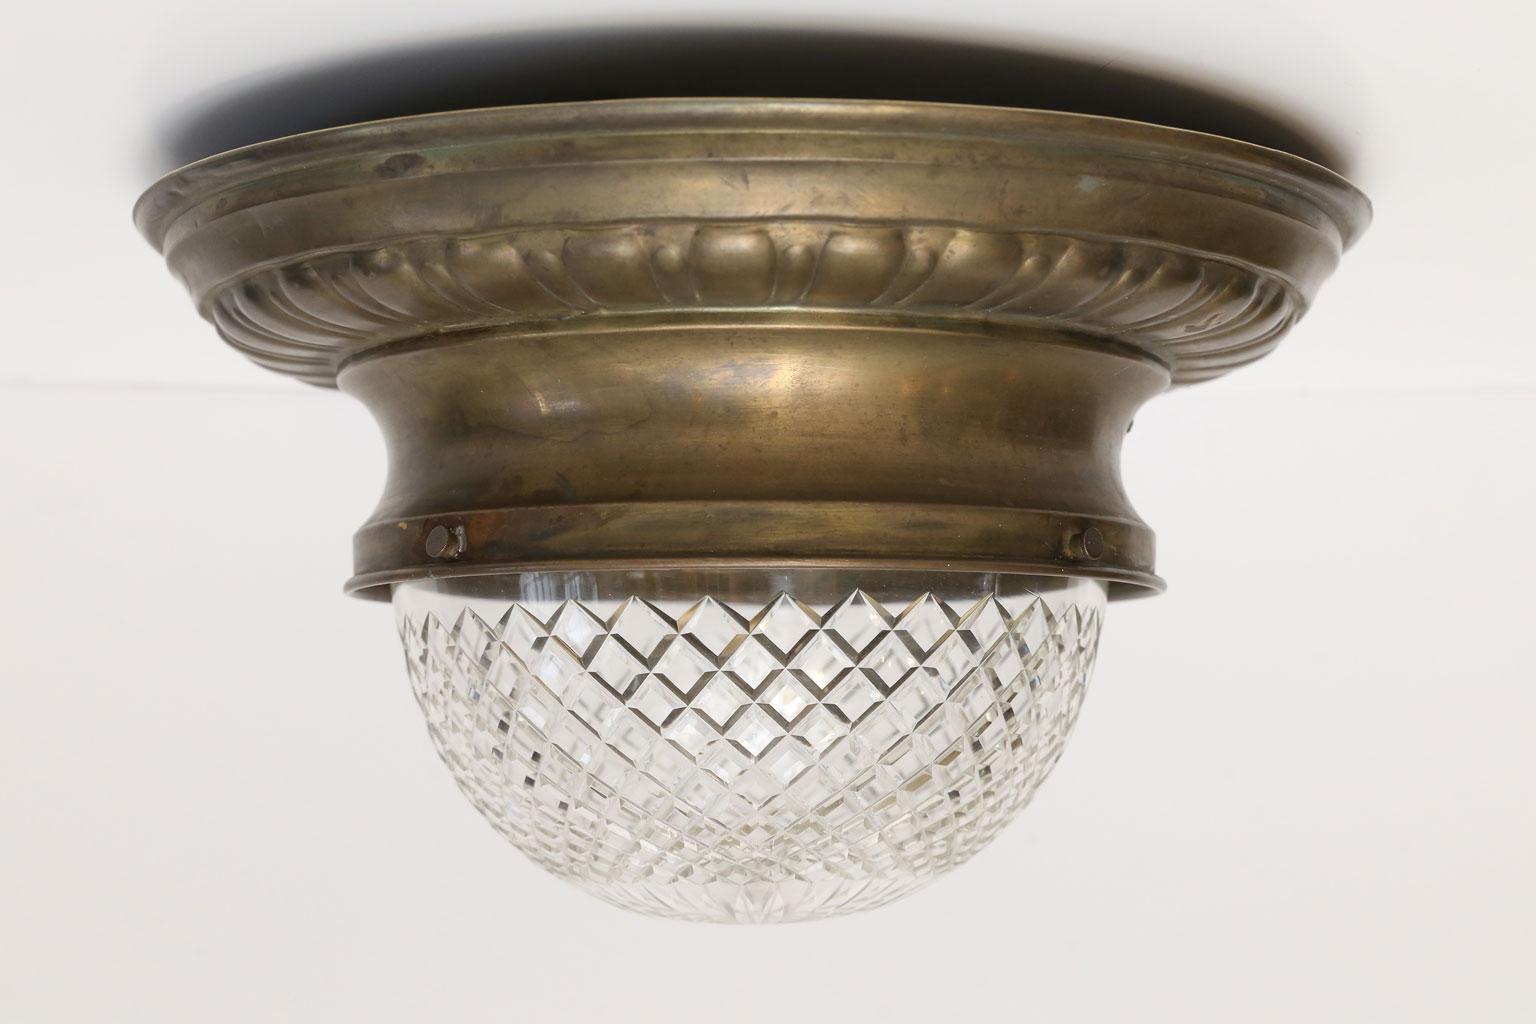 Repoussé flush mount light: brass fixture circled by repoussé decoration and finished with unusually deep cut-glass dome. This charming circa 1890 French light’s quirky proportions and elegant details will set the tone of a room. Perfect for small